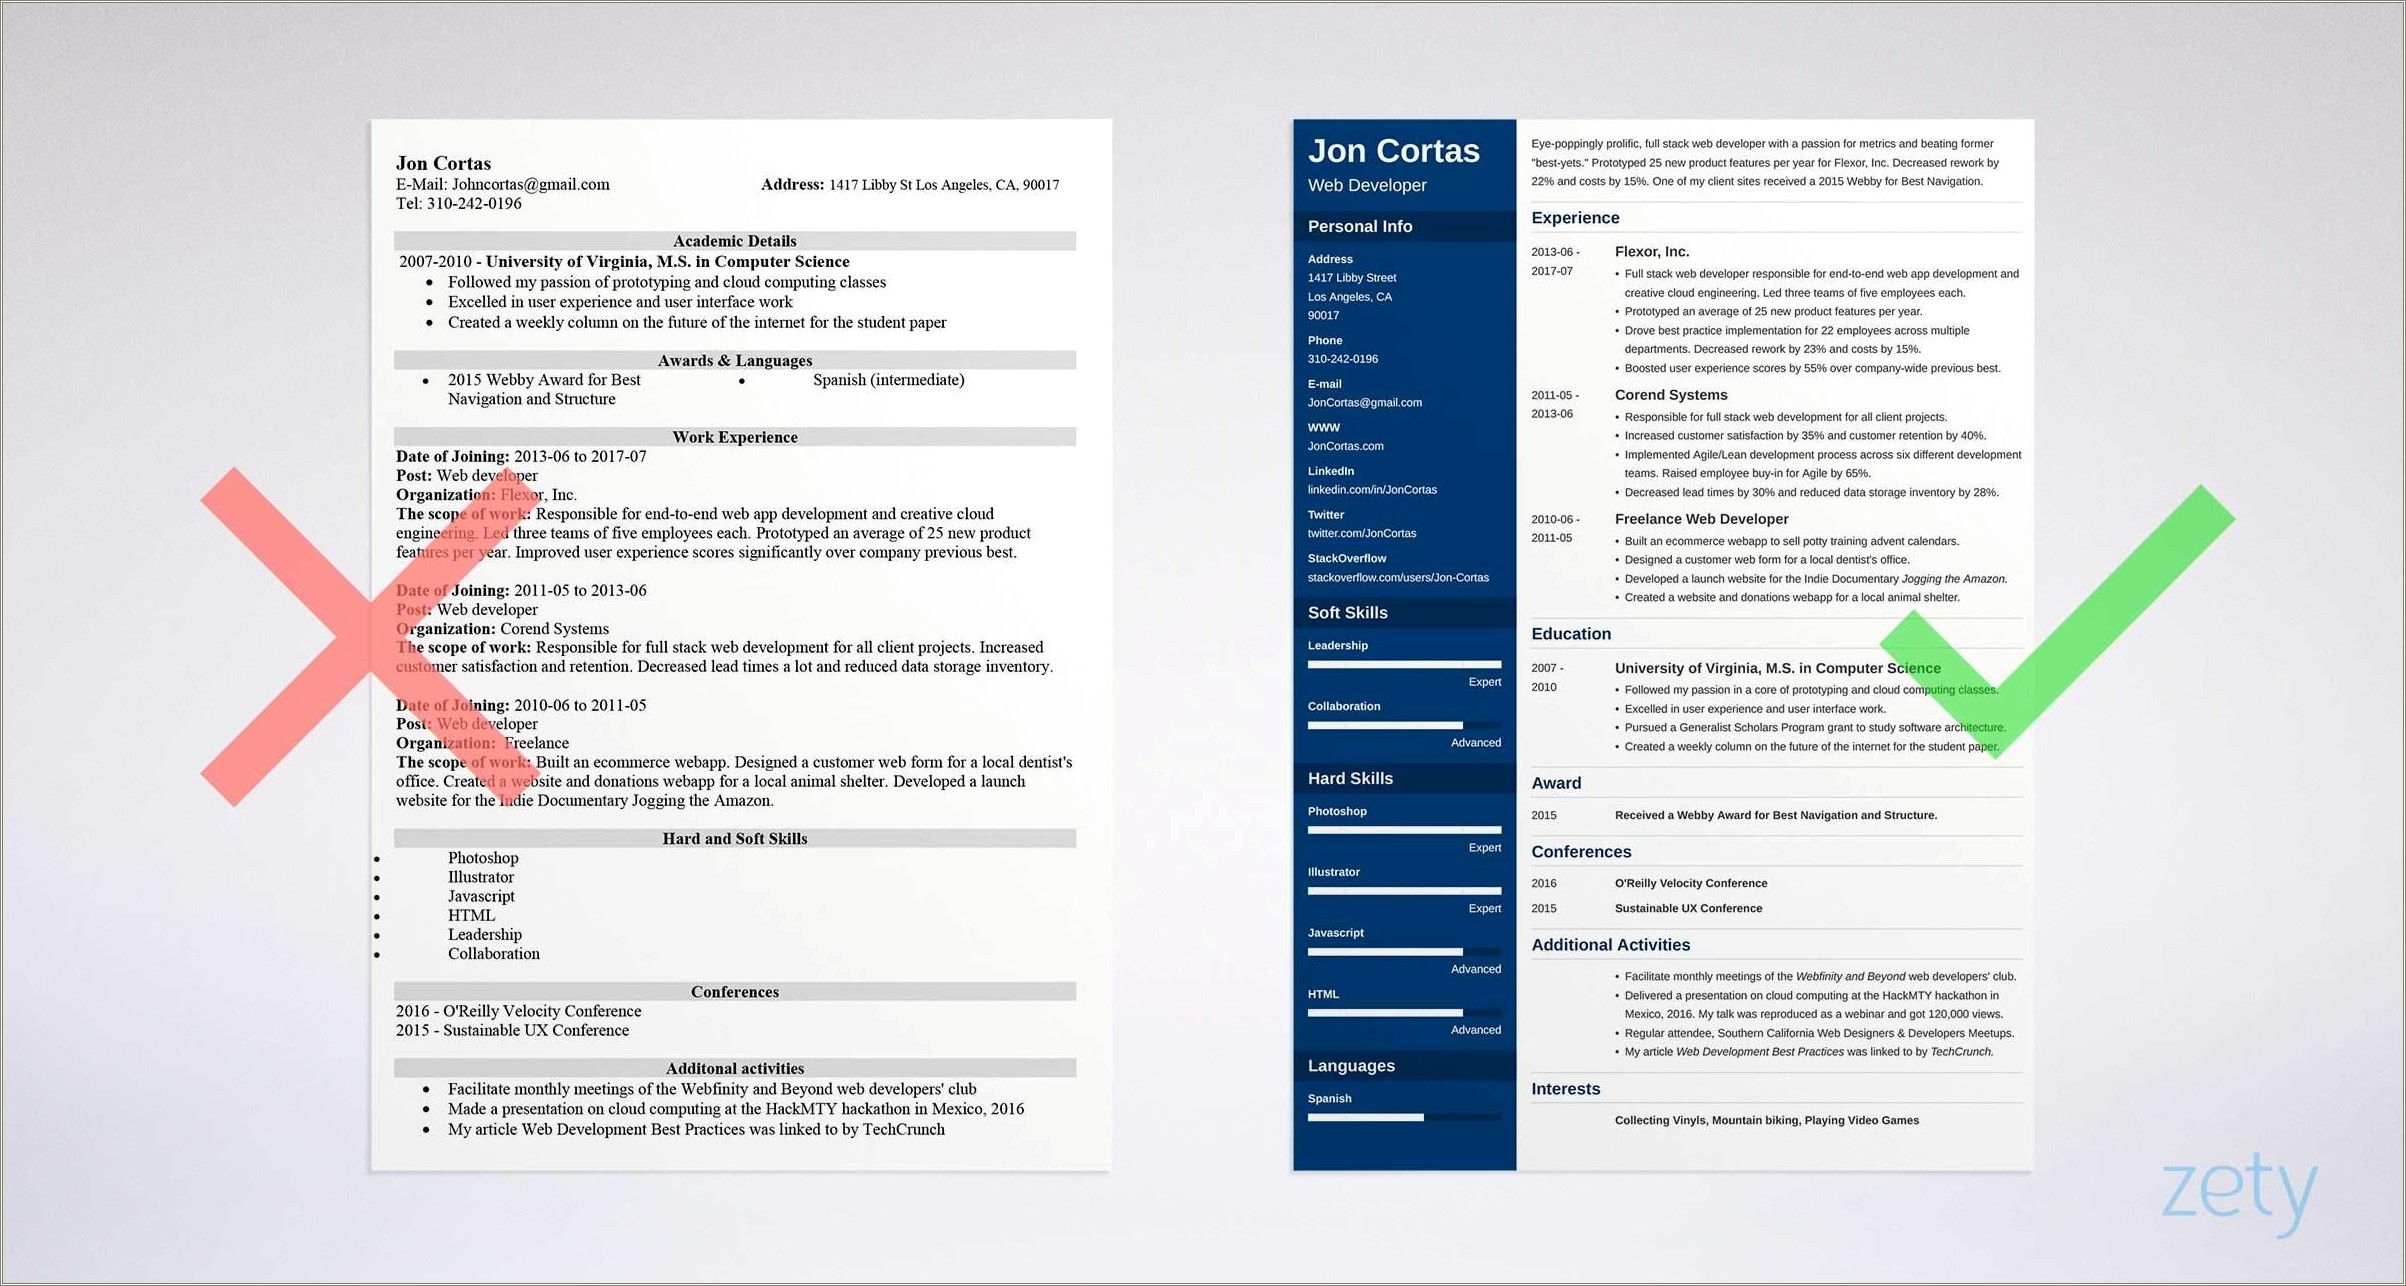 Compare Job Description And Resume Worksheets For Students